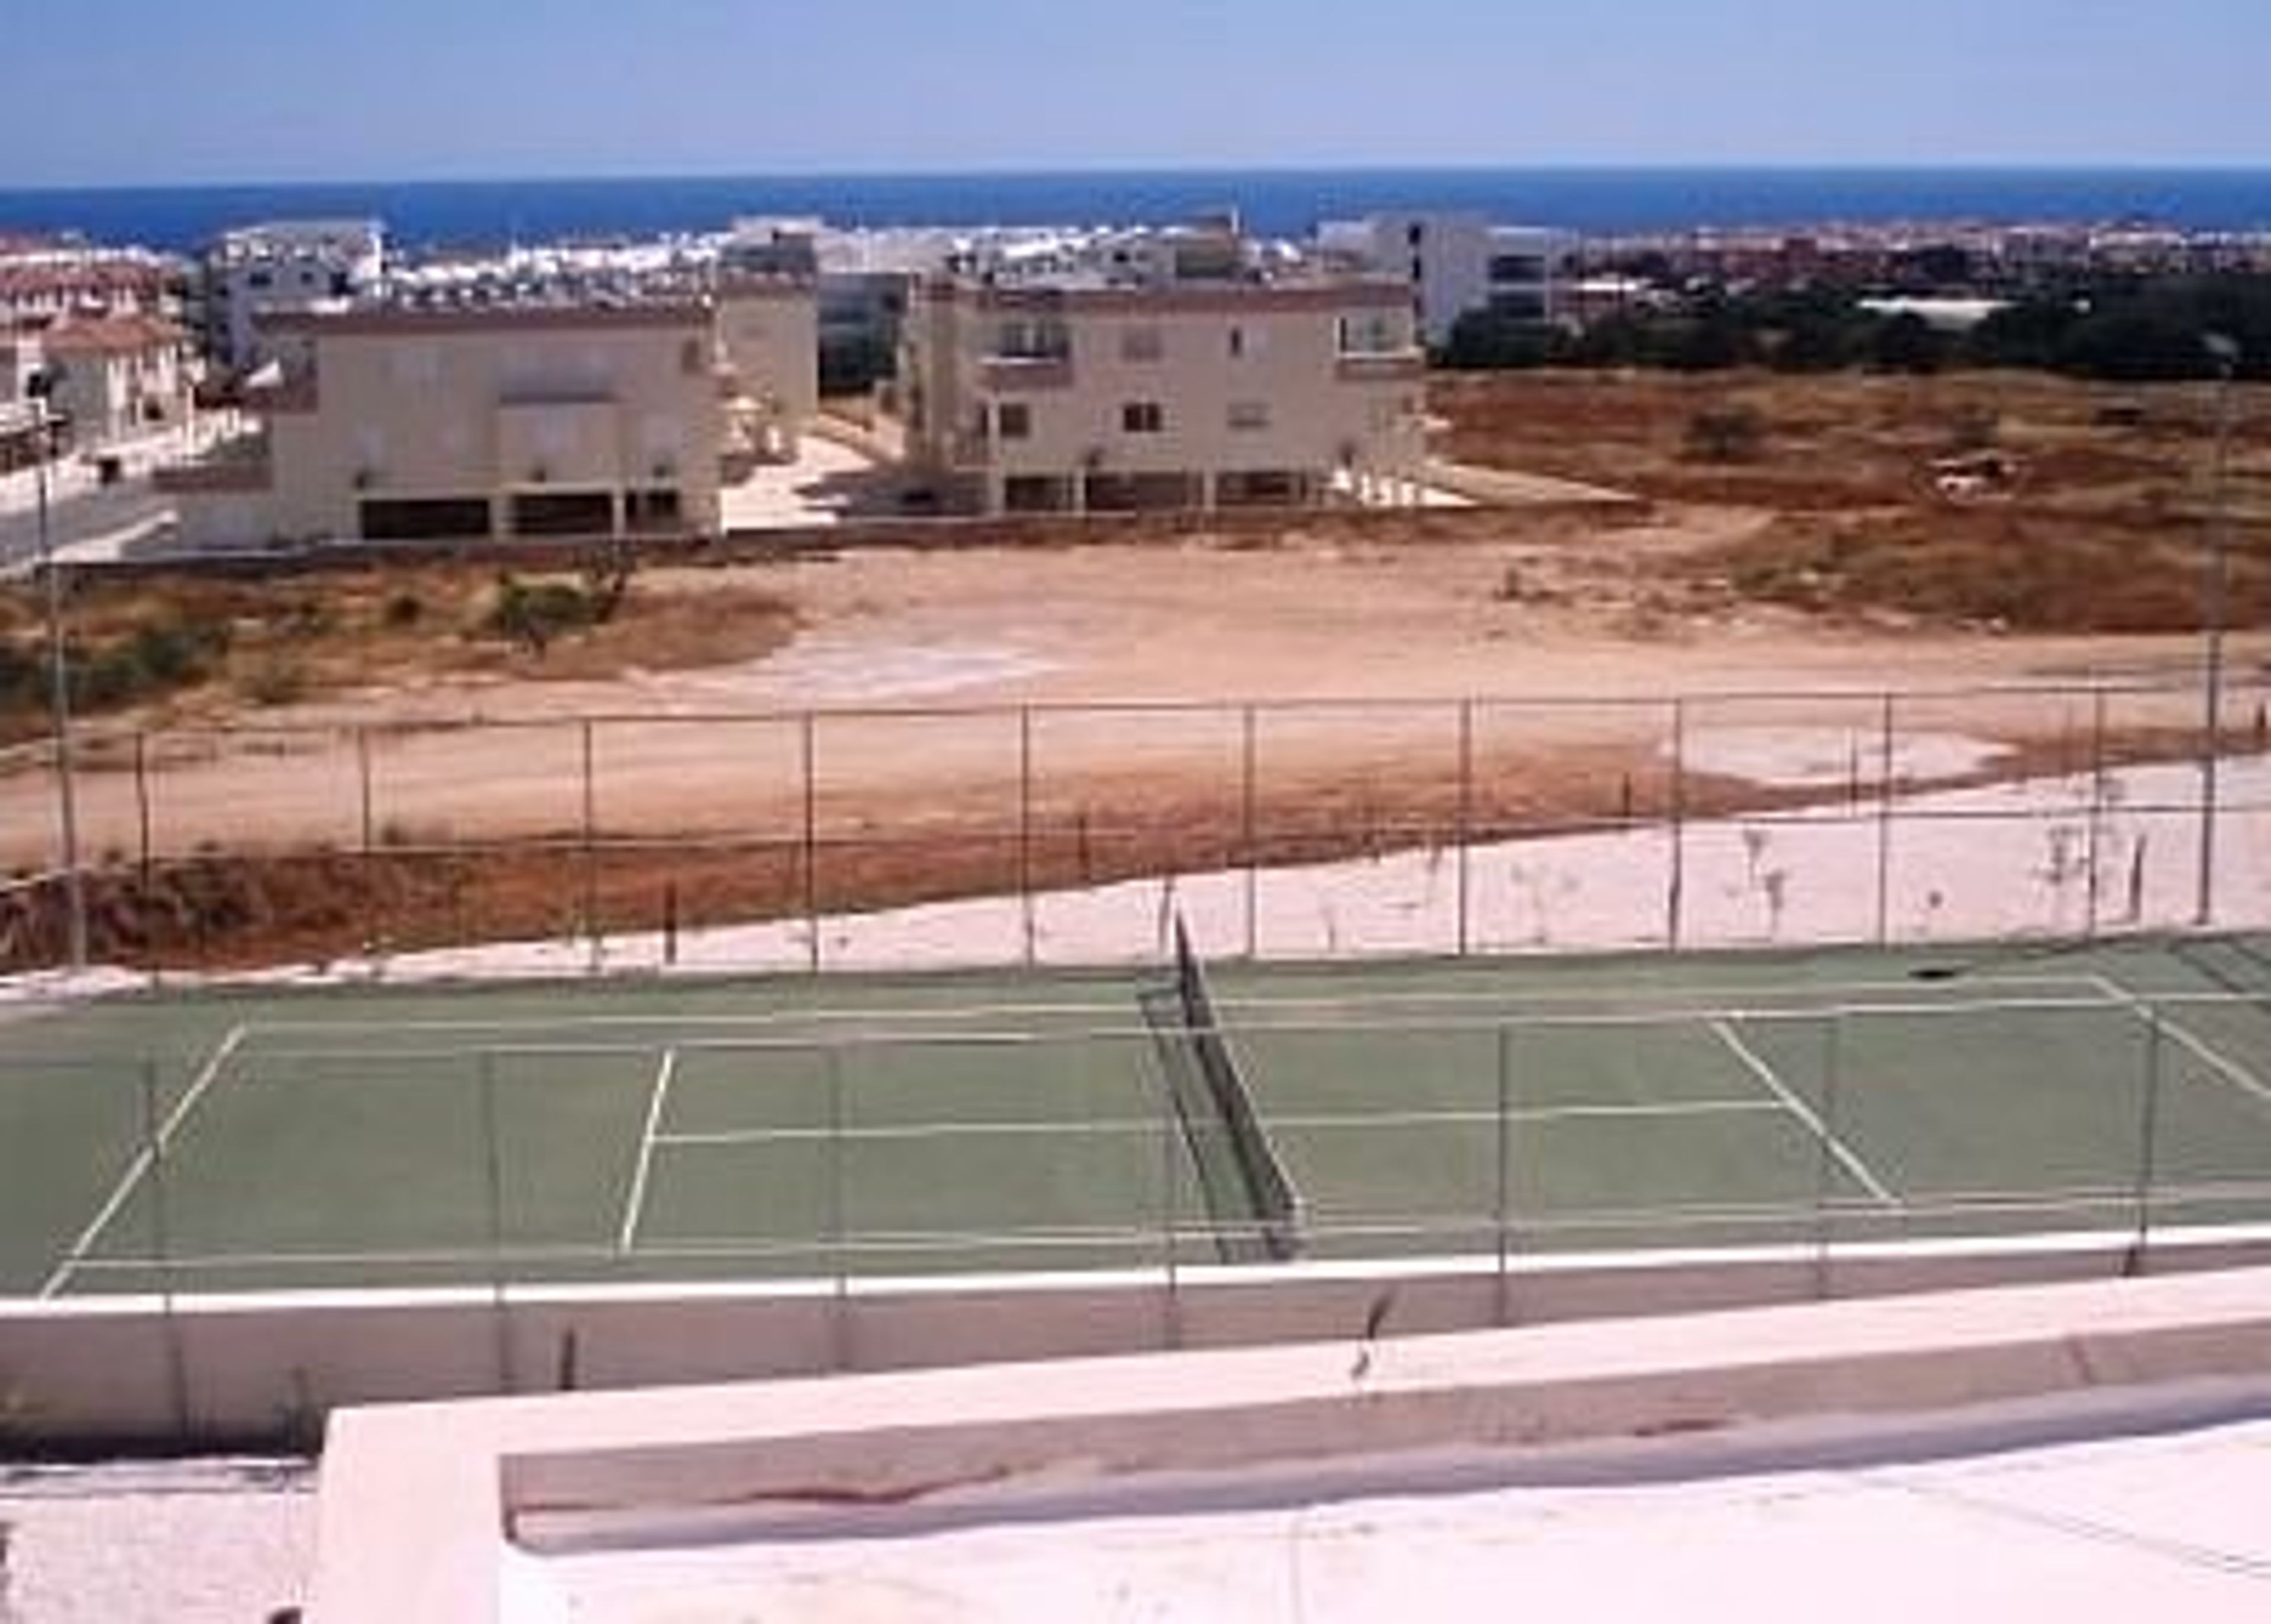 View over tennis courts to sea